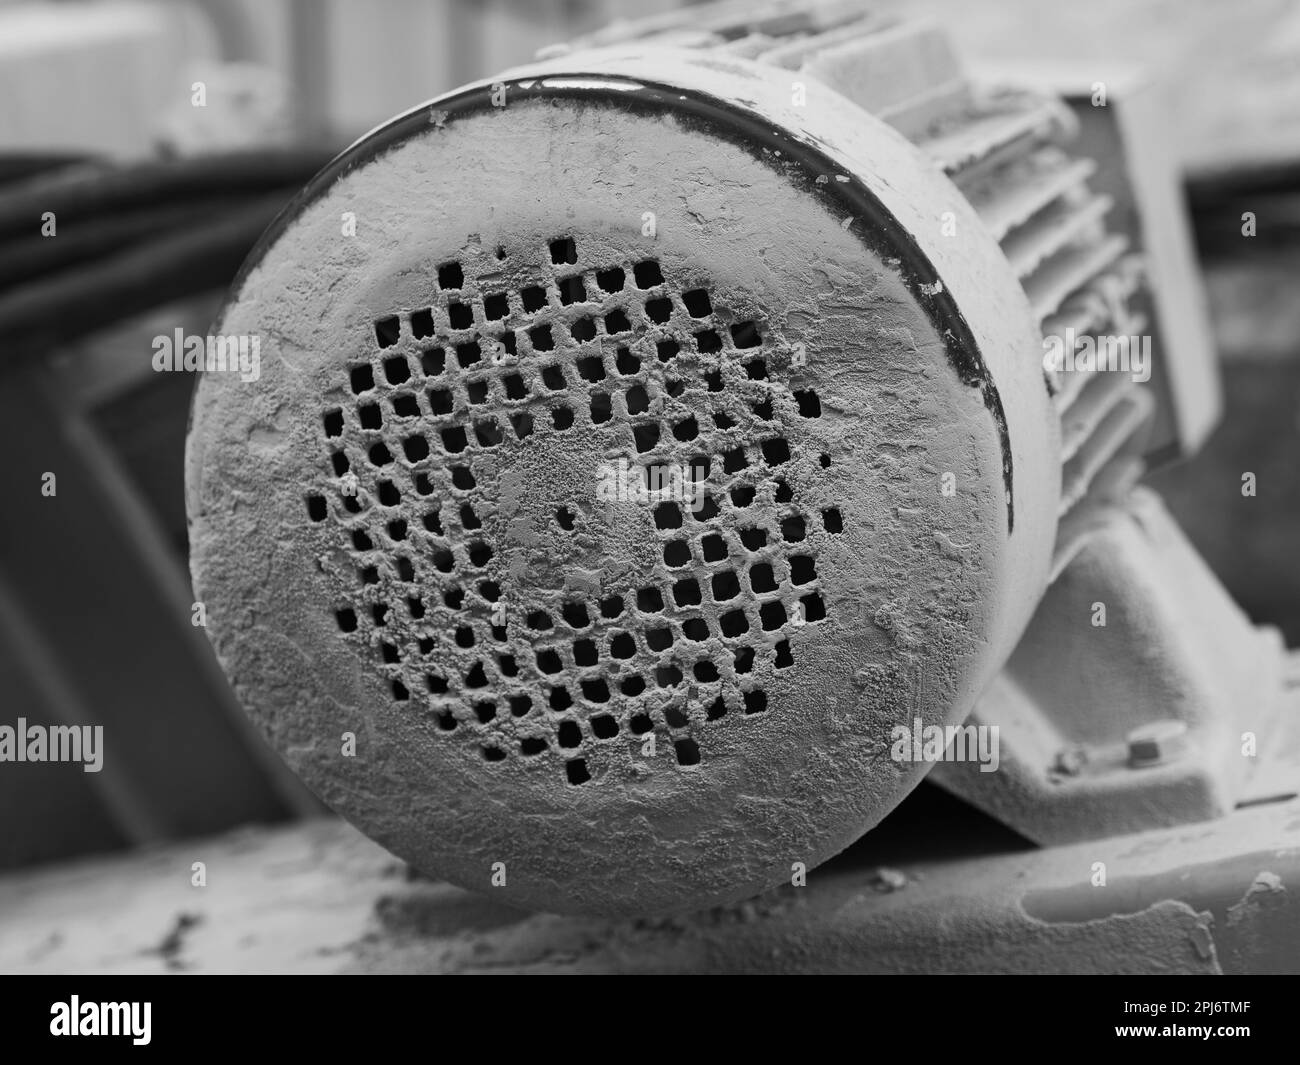 Close-up of a clogged filter of a concrete cutting machine on a construction site, black and white picture. Stock Photo